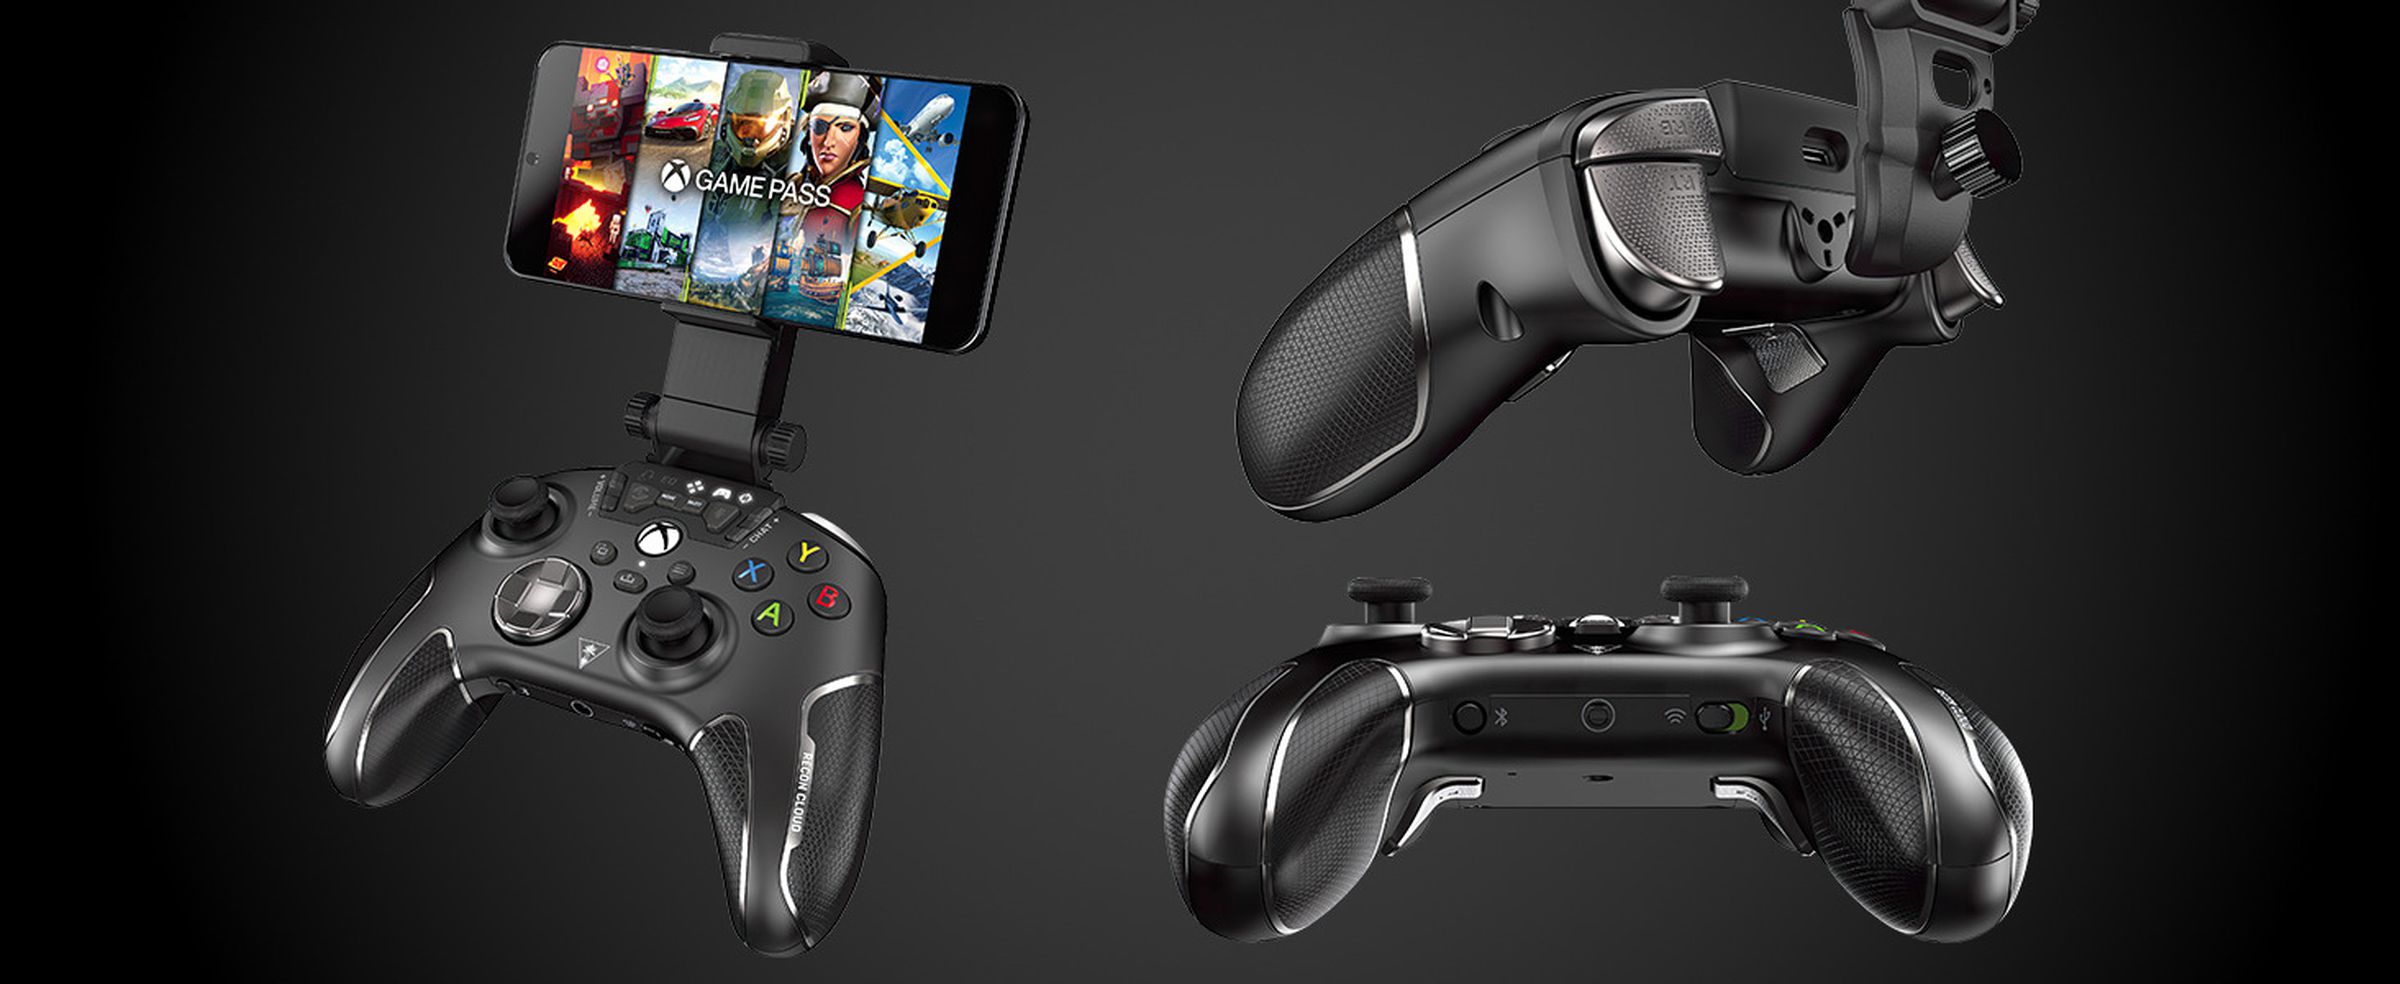 The Recon Cloud and its included mobile phone clip, which slots into the rear of the controller.